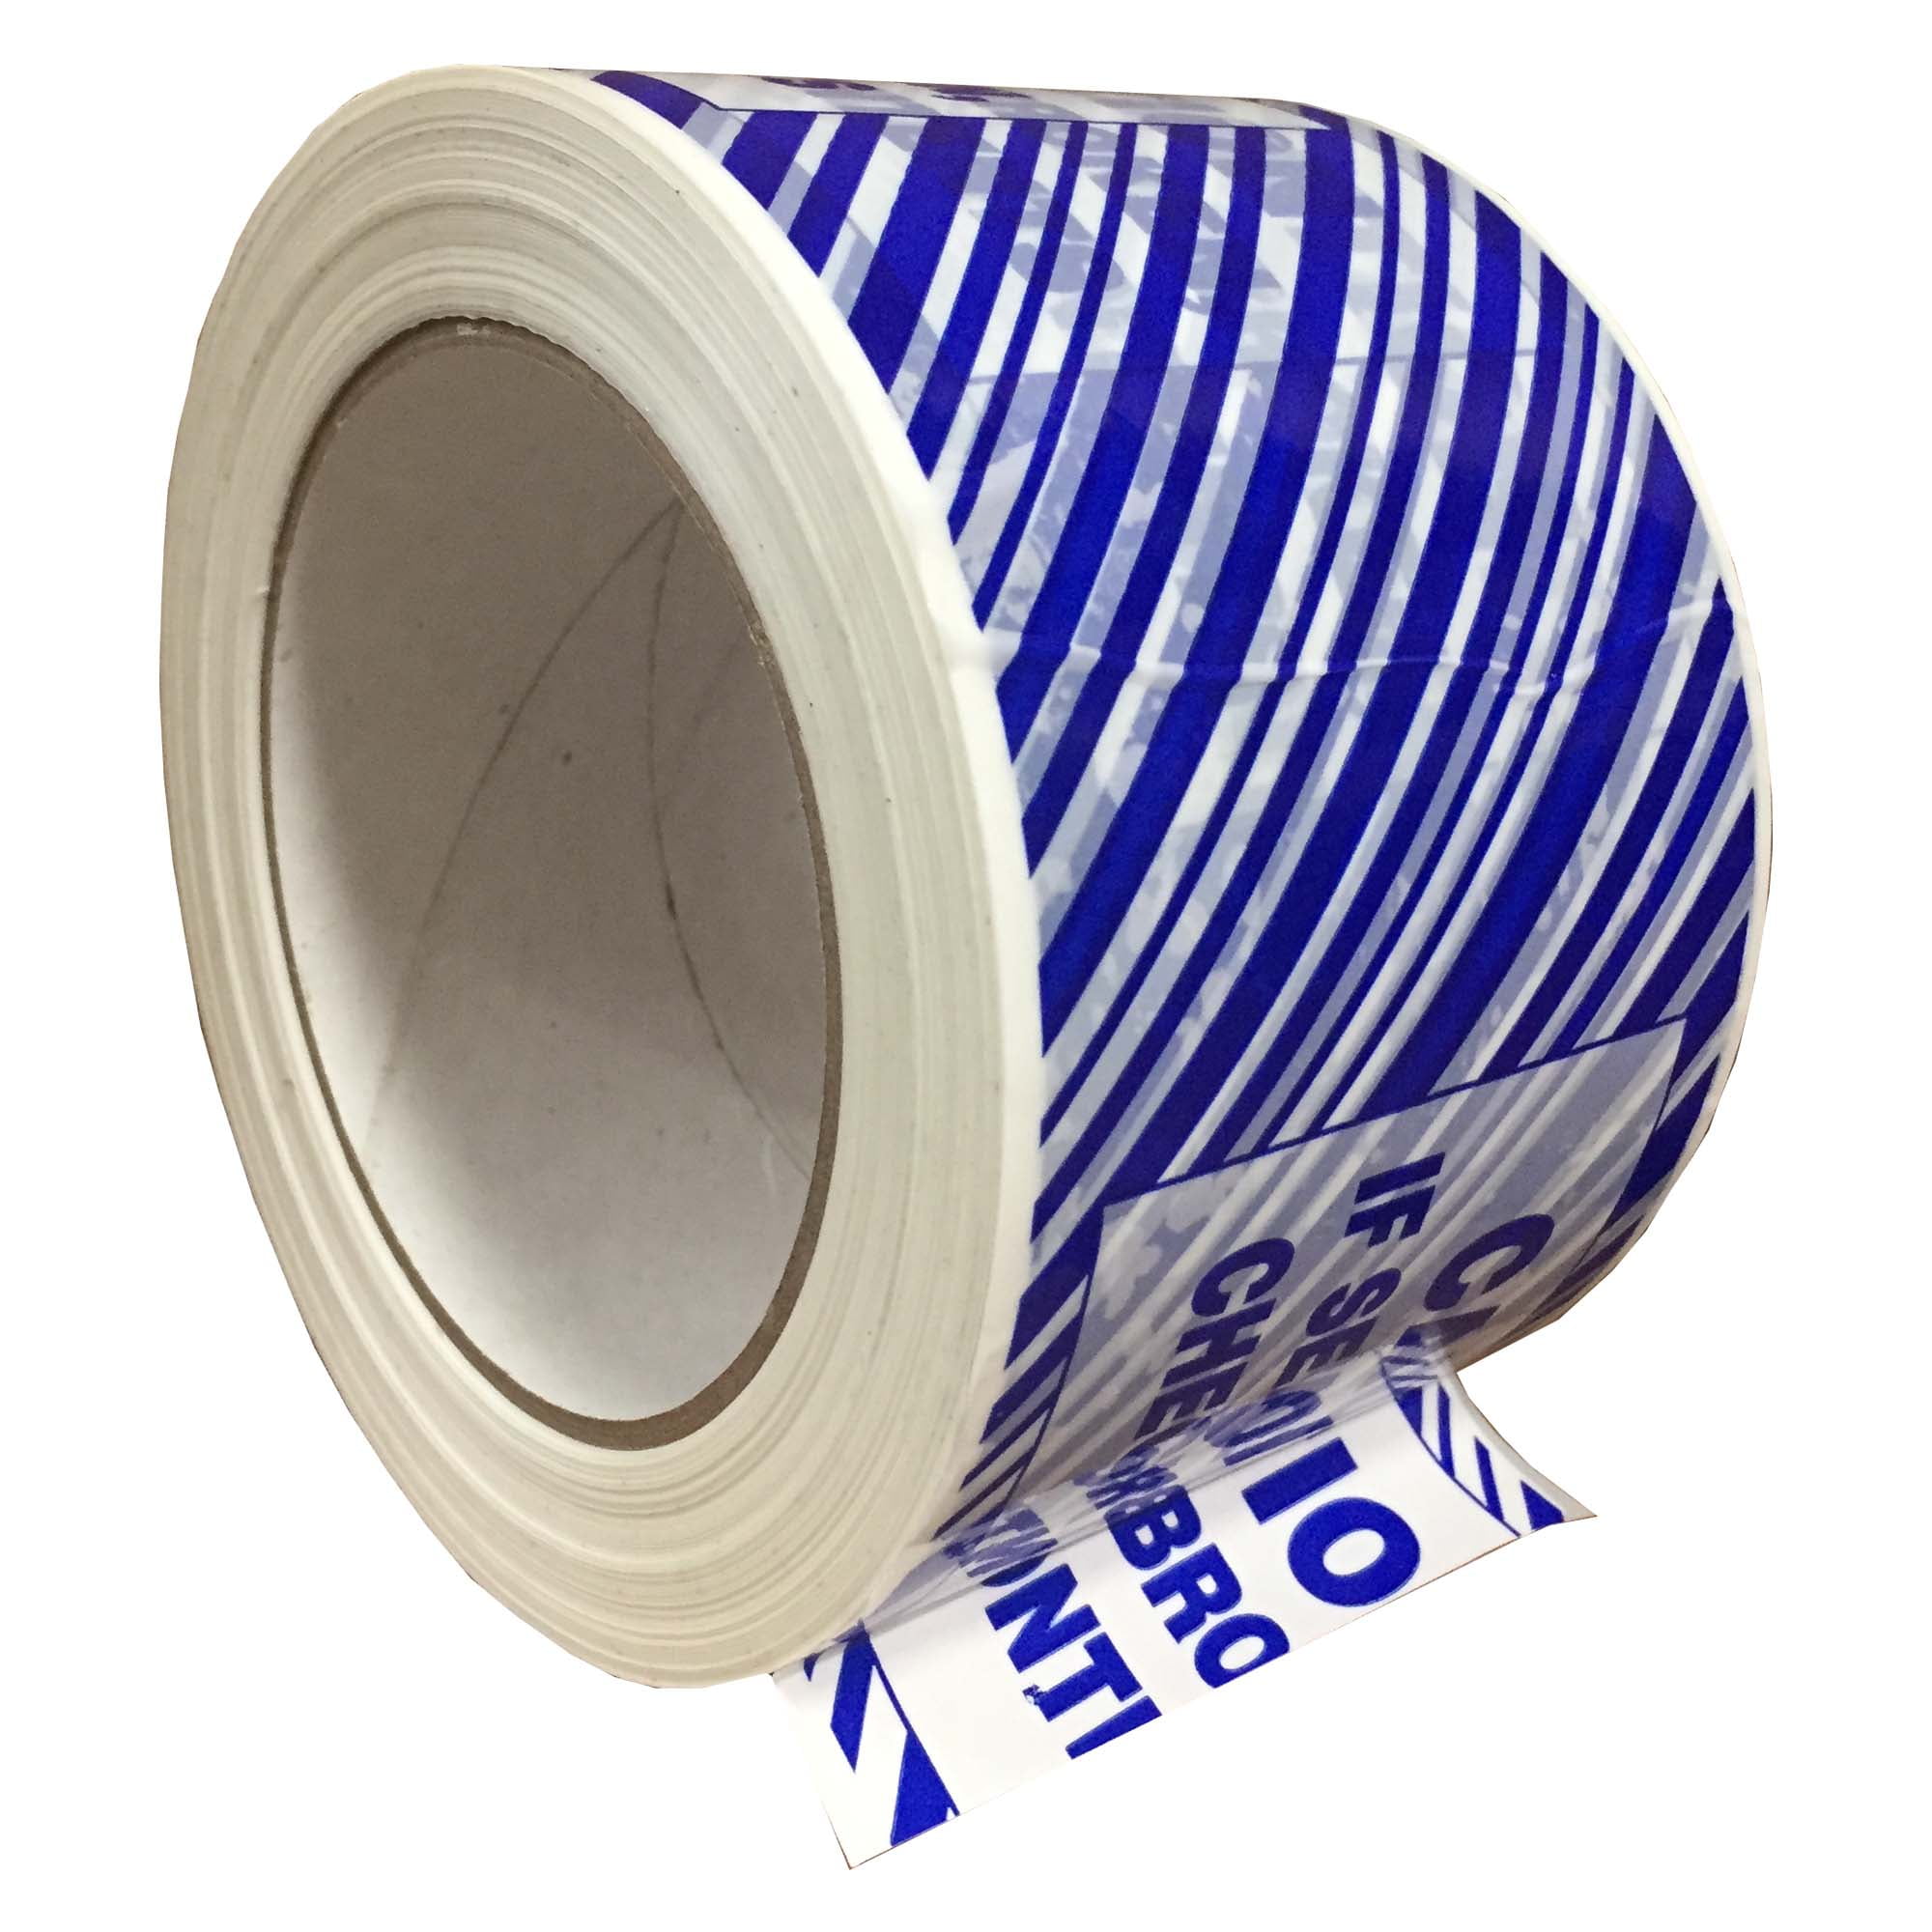 Hot Melt Adhesive Colorful Decorative Wide Duct Tape For Home Decoration